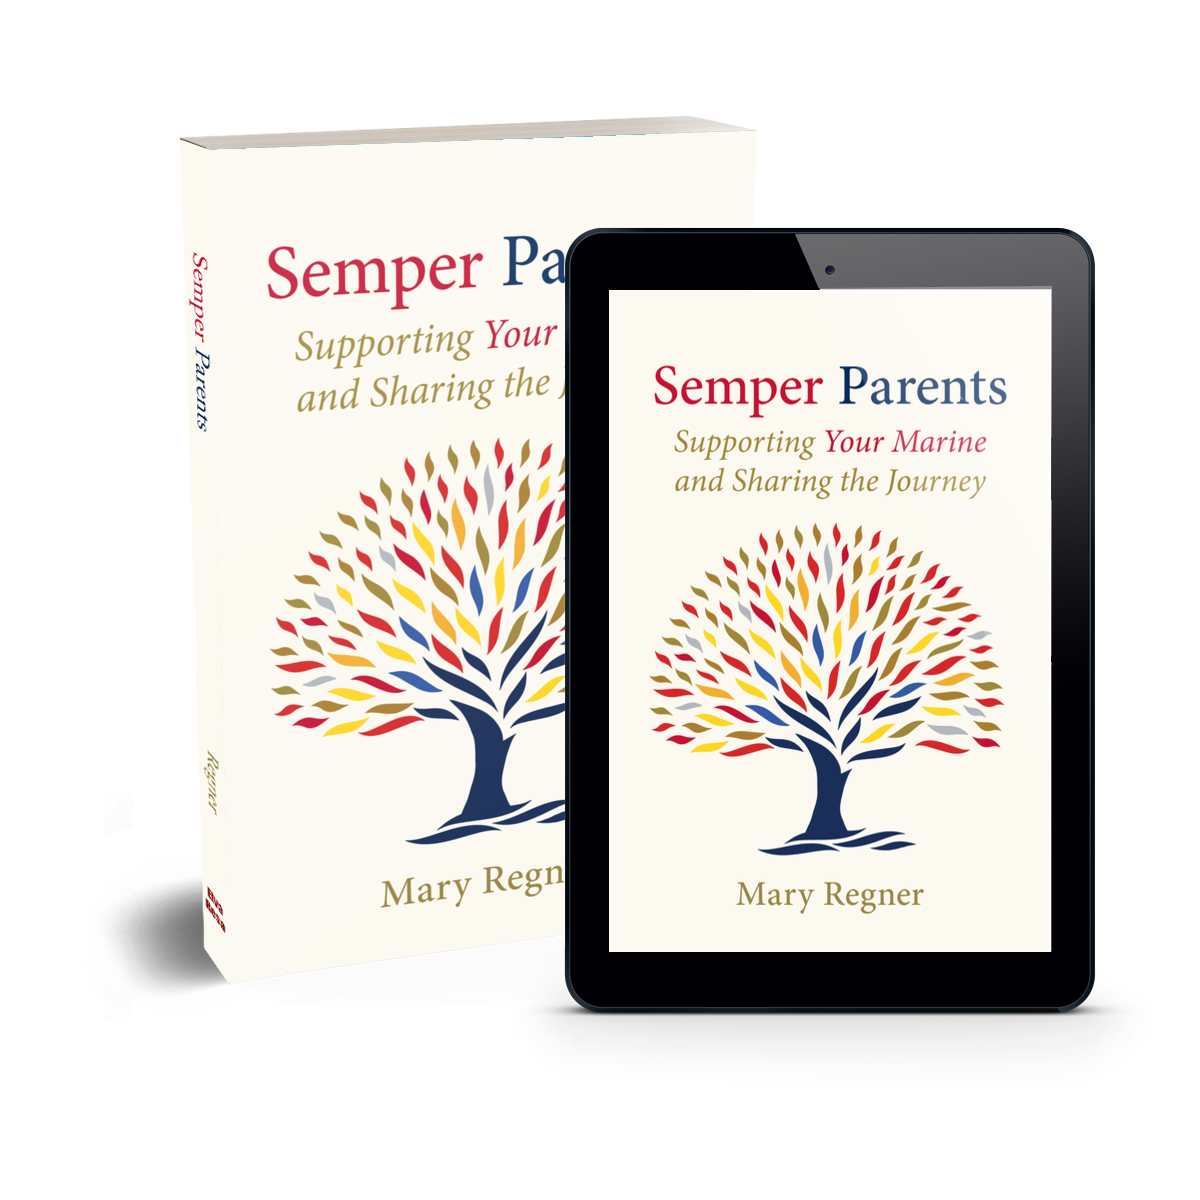 Semper Parents: Supporting Your Marine and Sharing the Journey by Mary Regner, published by Elva Resa